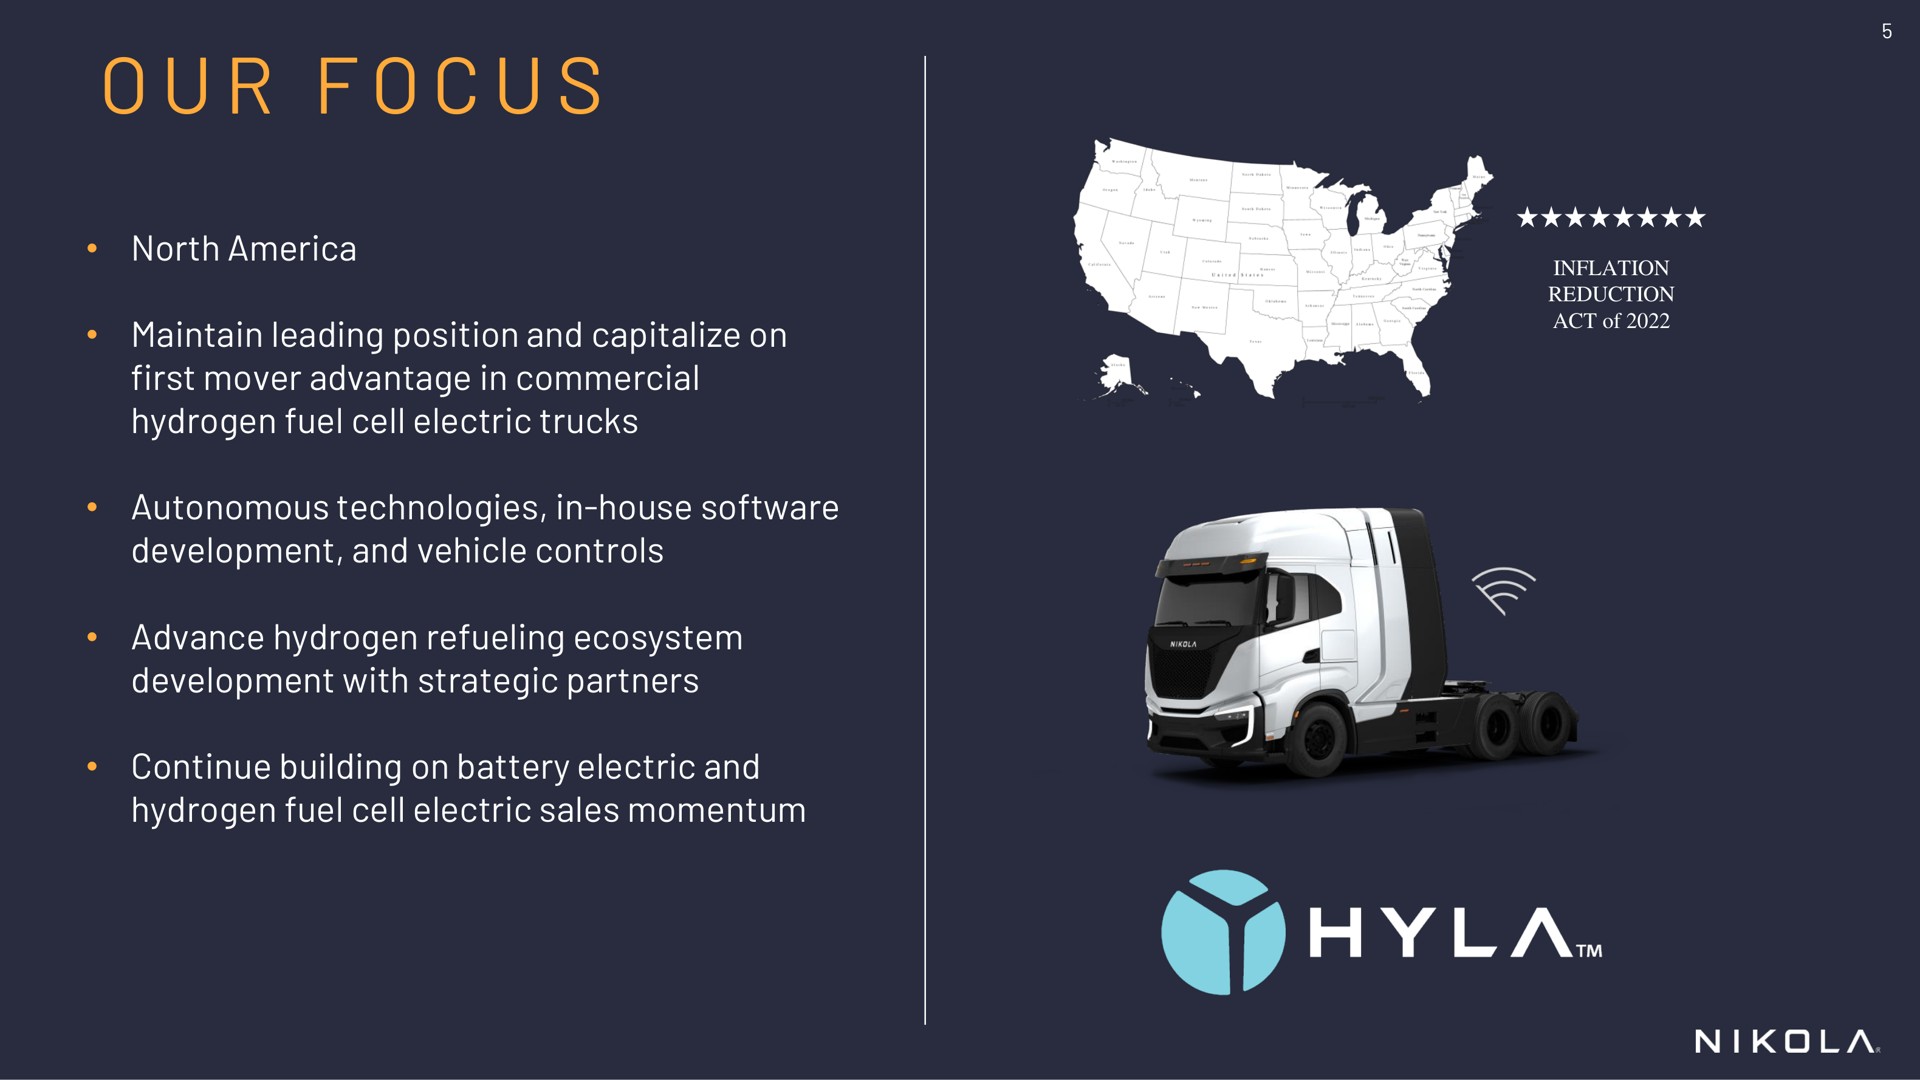 north maintain leading position and capitalize on first mover advantage in commercial hydrogen fuel cell electric trucks autonomous technologies in house development and vehicle controls advance hydrogen refueling ecosystem development with strategic partners continue building on battery electric and hydrogen fuel cell electric sales momentum our focus | Nikola